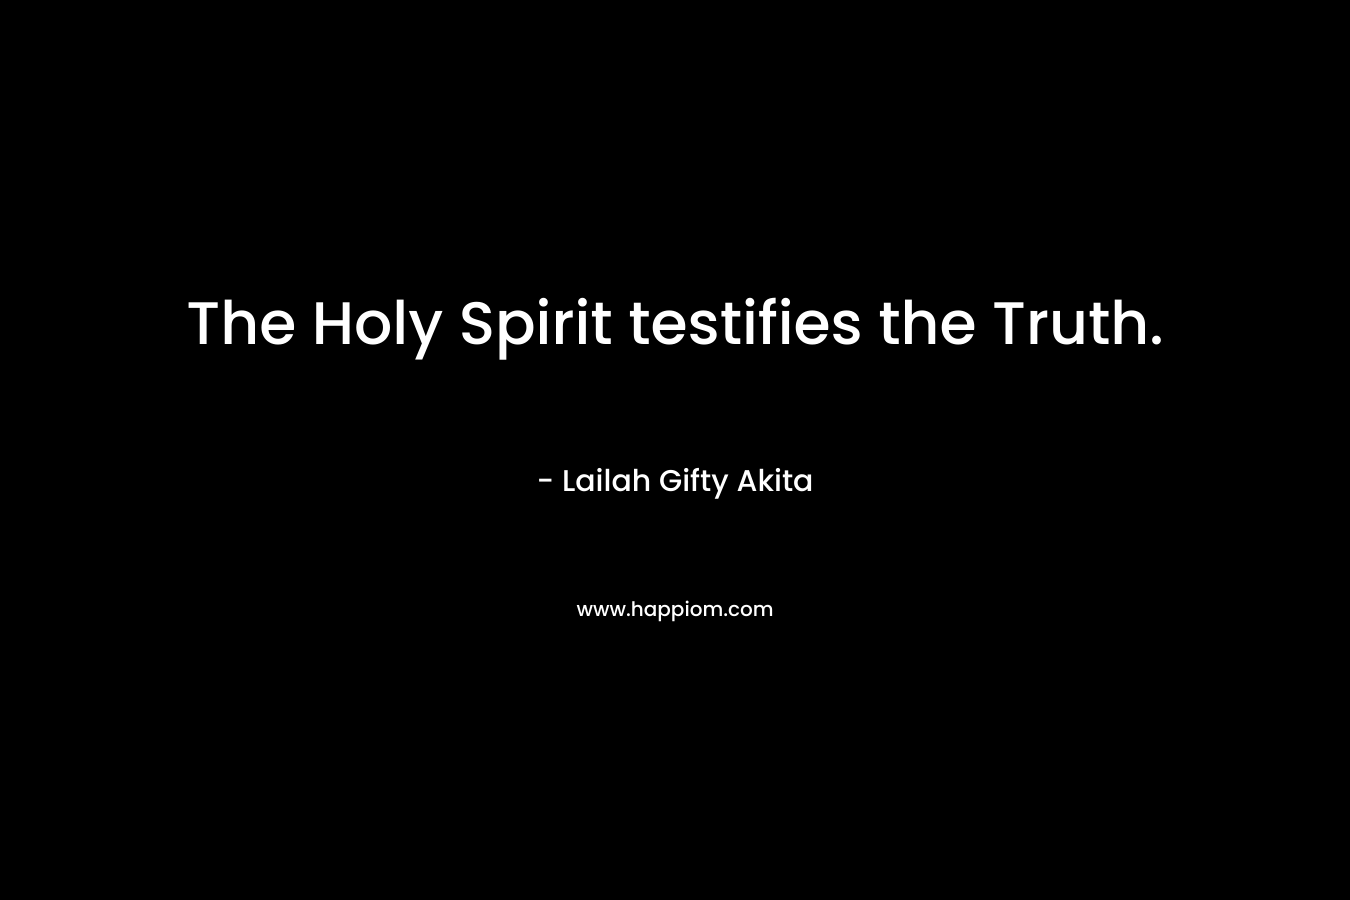 The Holy Spirit testifies the Truth.